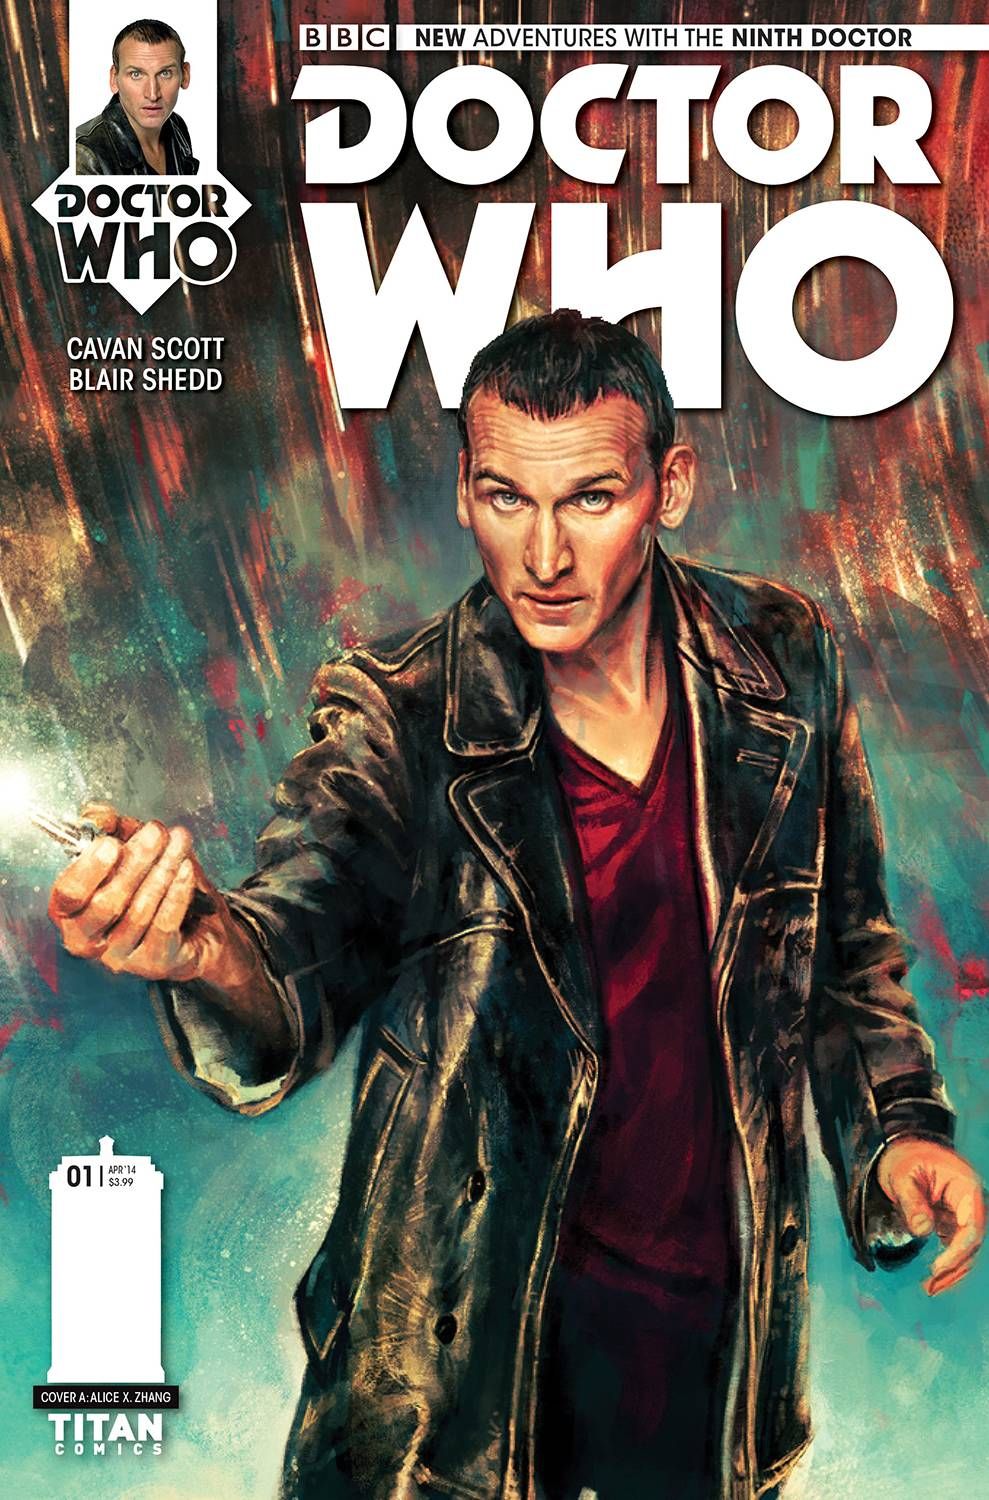 Doctor Who: The Ninth Doctor #1 Comic